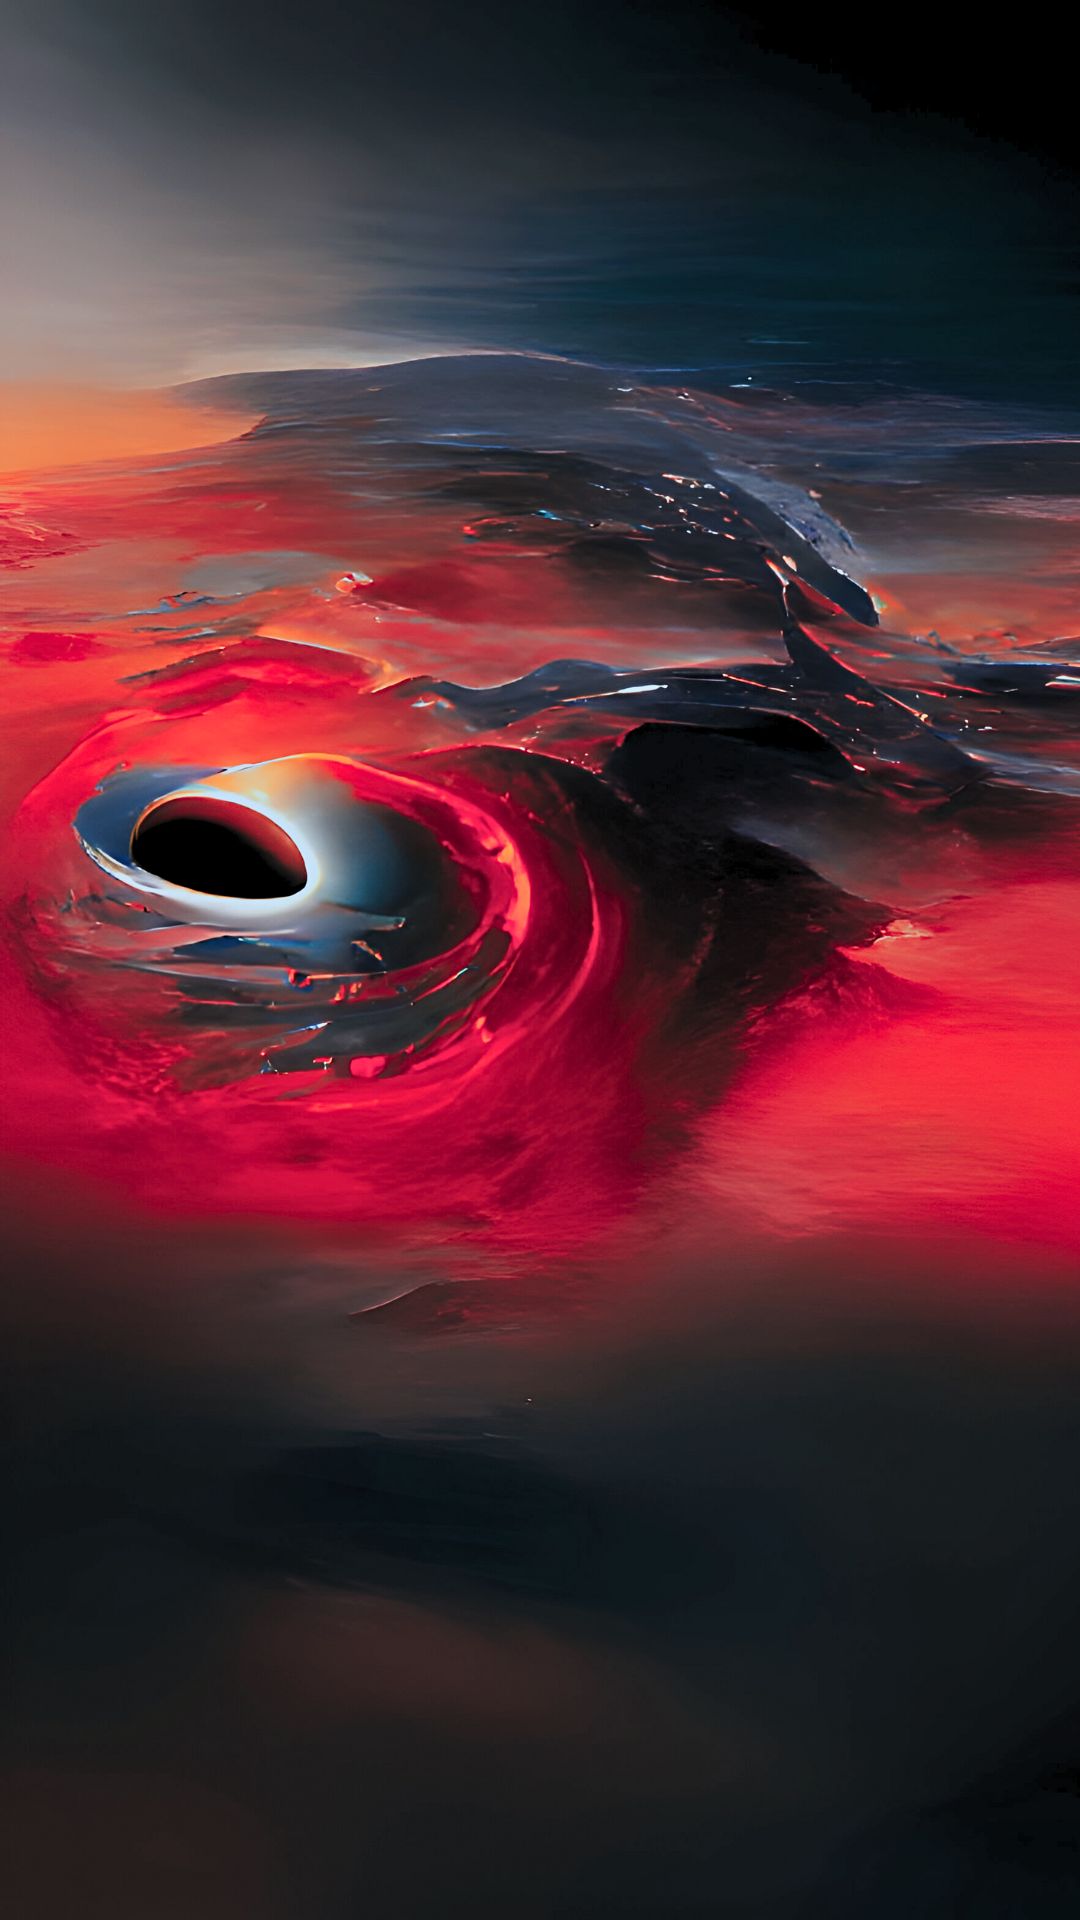 Black Hole HD Wallpaper For Android